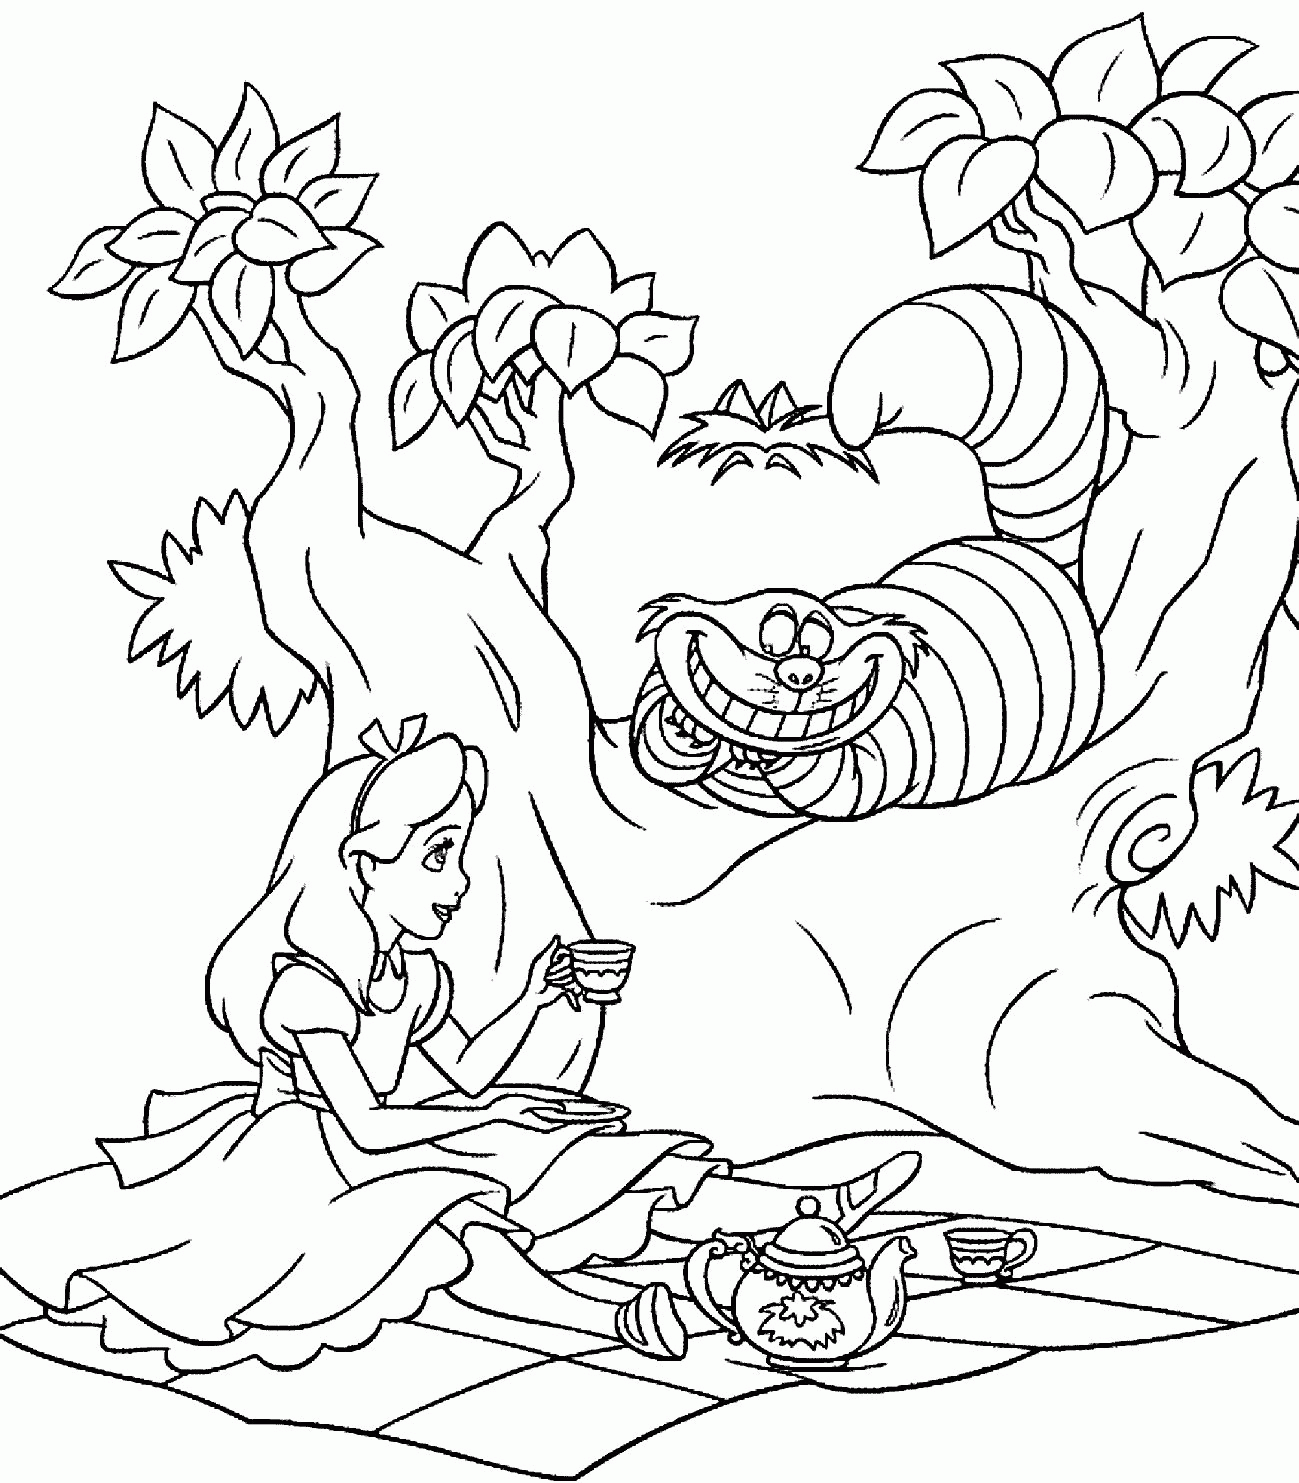 Alice Printable Coloring Pages | Coloring Pages For All Ages